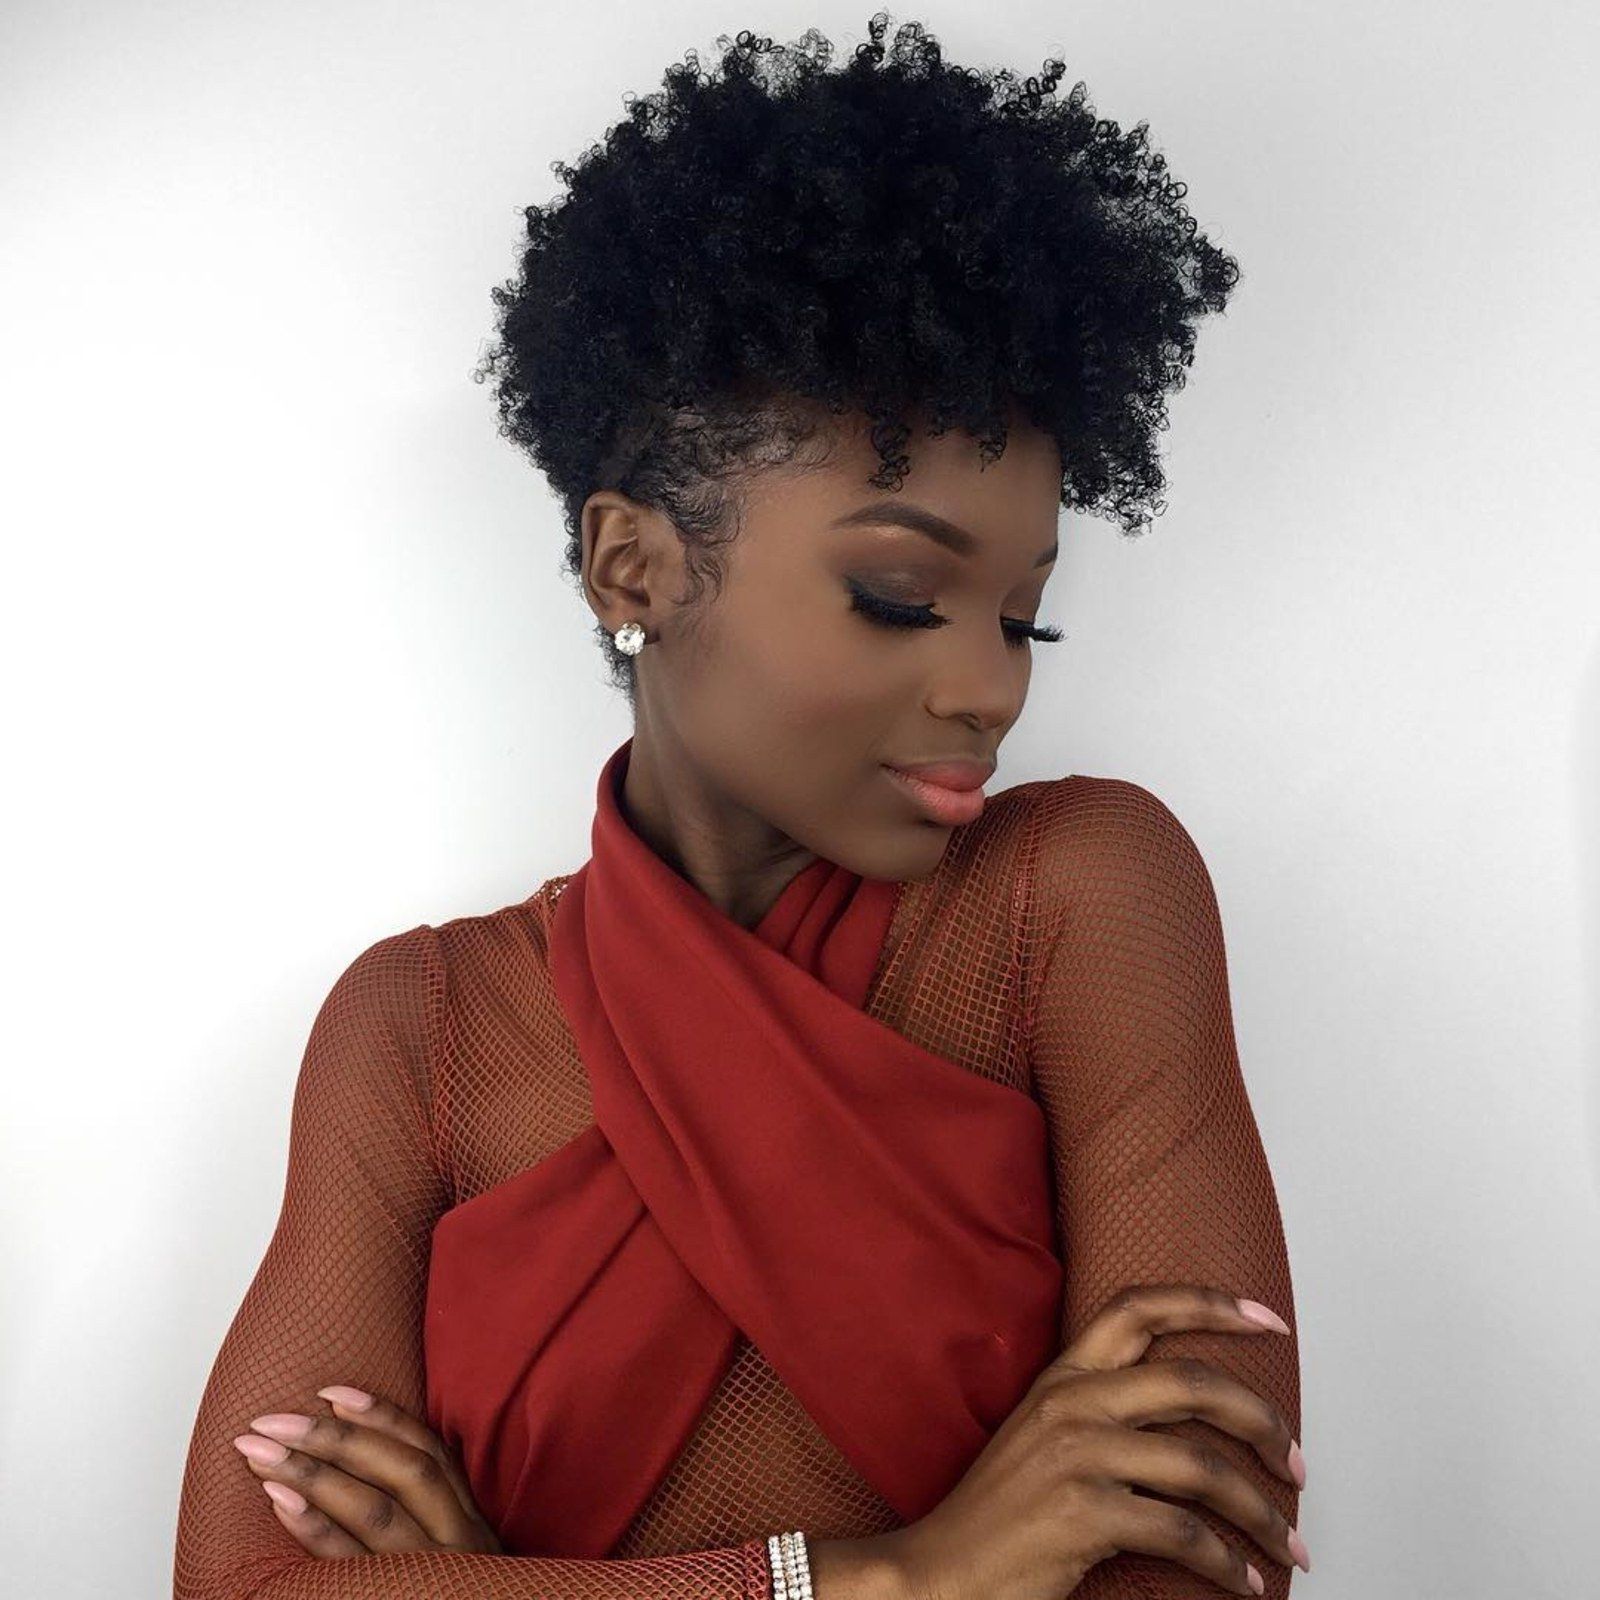 28 Curly Pixie Cuts That Are Perfect For Fall 2017 – Glamour With Regard To Curly Black Tapered Pixie Hairstyles (Gallery 19 of 20)